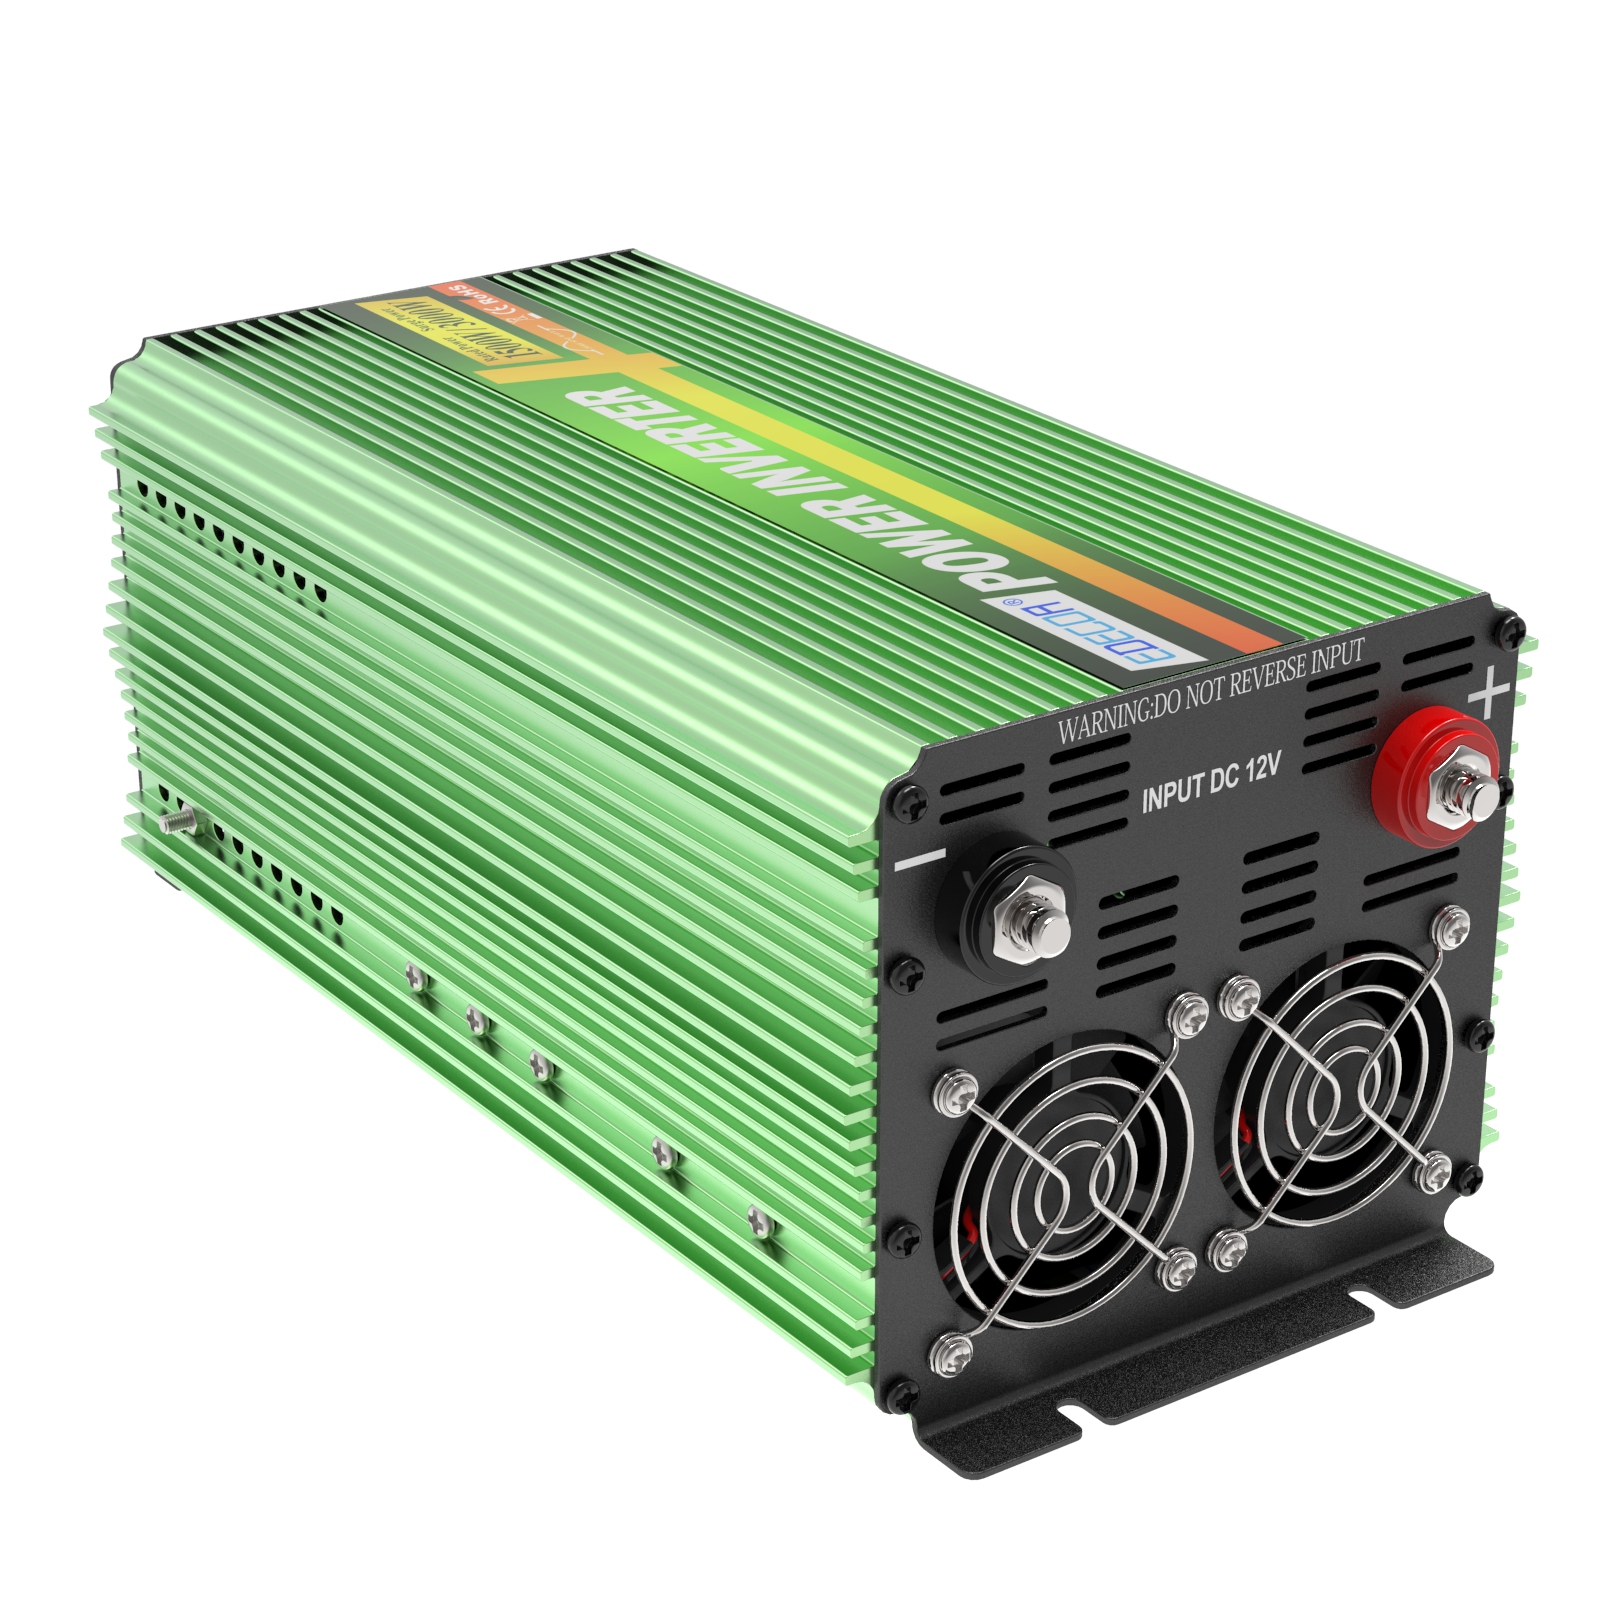 Edecoa 1500W LCD Power Inverter 12V 120V Pure Sine Wave 2x USB and remote controller Green (3)